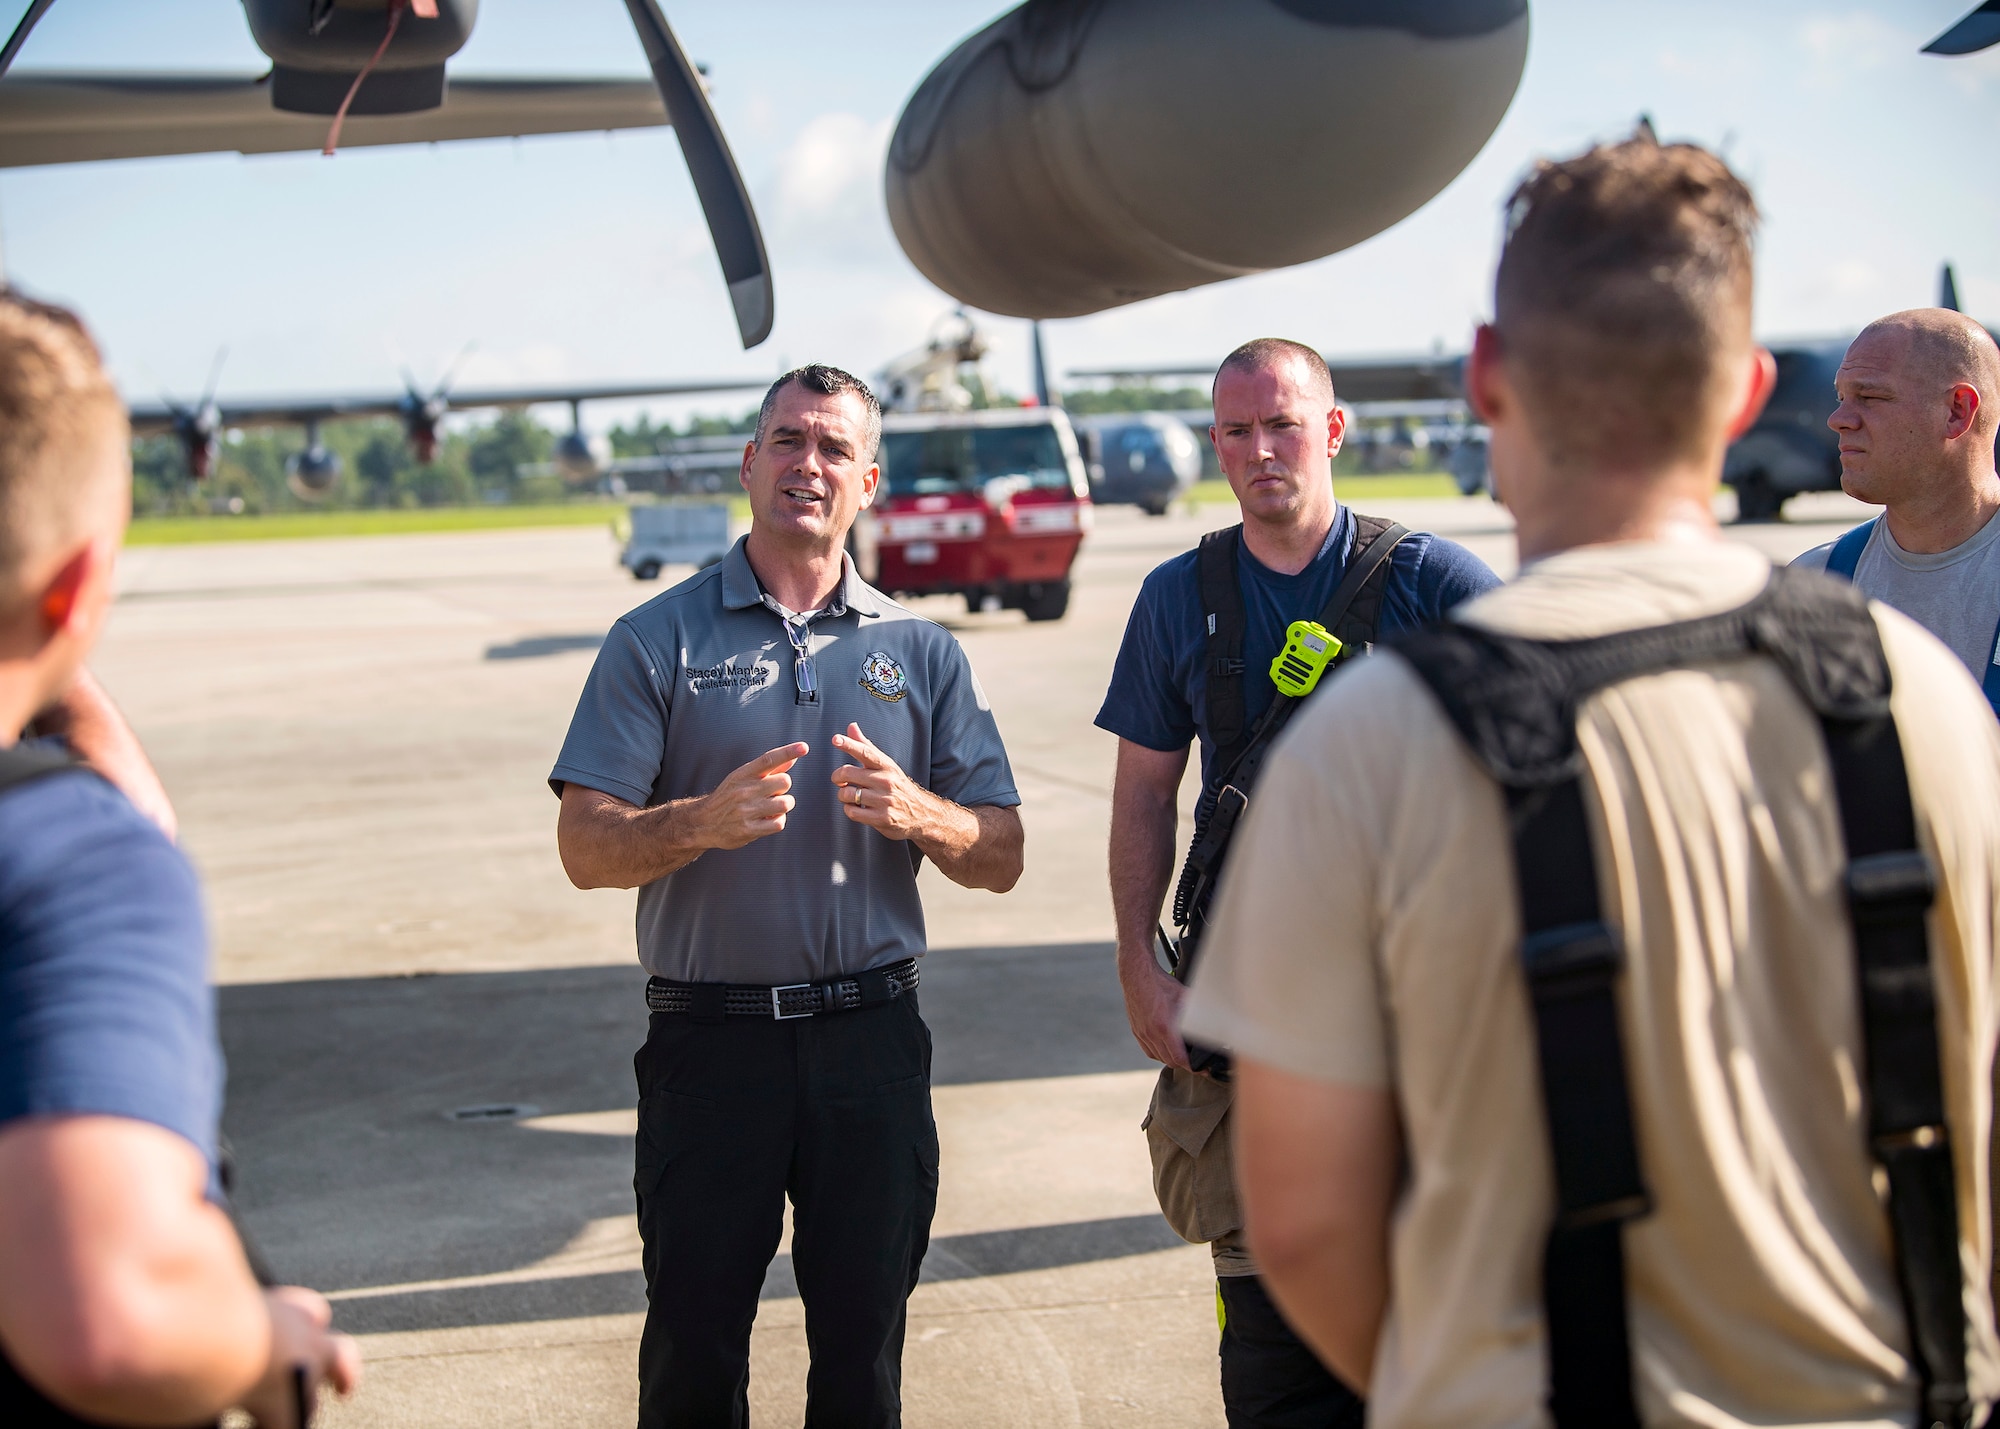 Stacey Maples, center, 23d Civil Engineer Squadron (CES) assistant fire chief, discusses the performance of the firefighters from the 23d CES following HC-130J Combat King II egress training, July 11, 2019, at Moody Air Force Base, Ga. Firefighters conducted the training to evaluate their overall knowledge and proficiency of how to properly shut down and rescue personnel from a C-130 during an emergency situation. The training required the firefighters to properly enter and ventilate the aircraft while conducting swift rescue techniques to safely locate and remove passengers from the aircraft. (U.S. Air Force photo by Airman 1st Class Eugene Oliver)